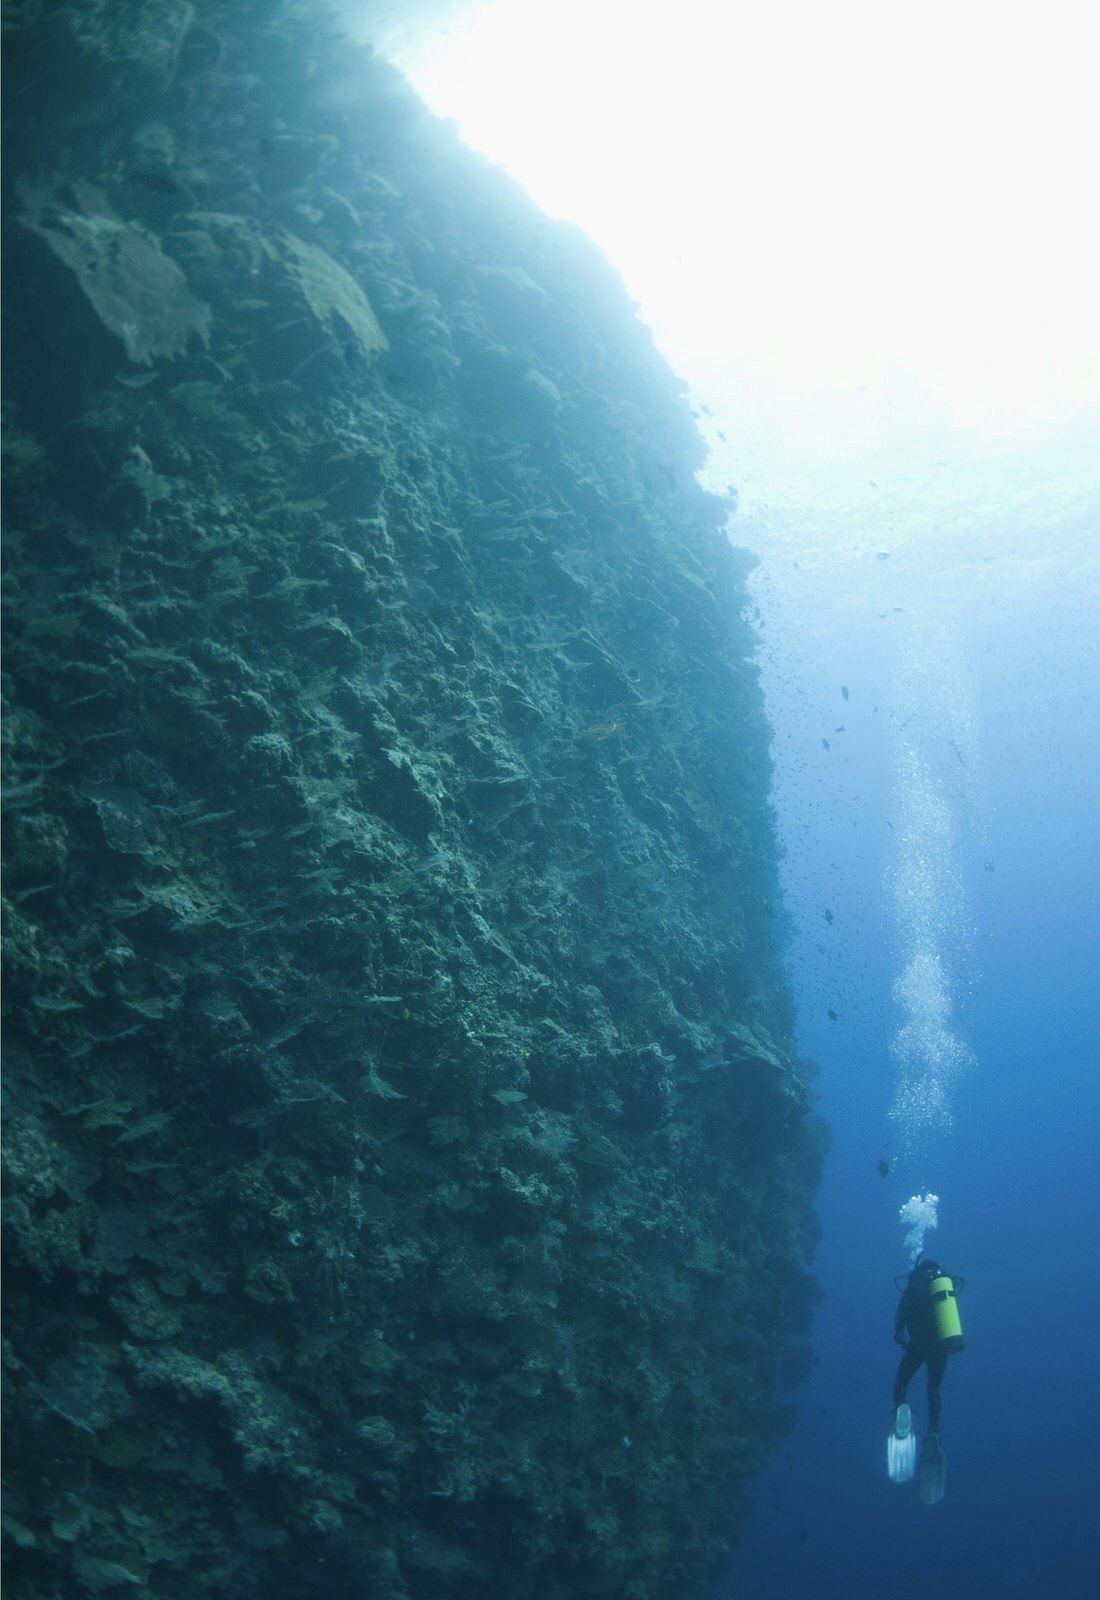 A diver floats next to a vertical wall of coral that extents into the depths